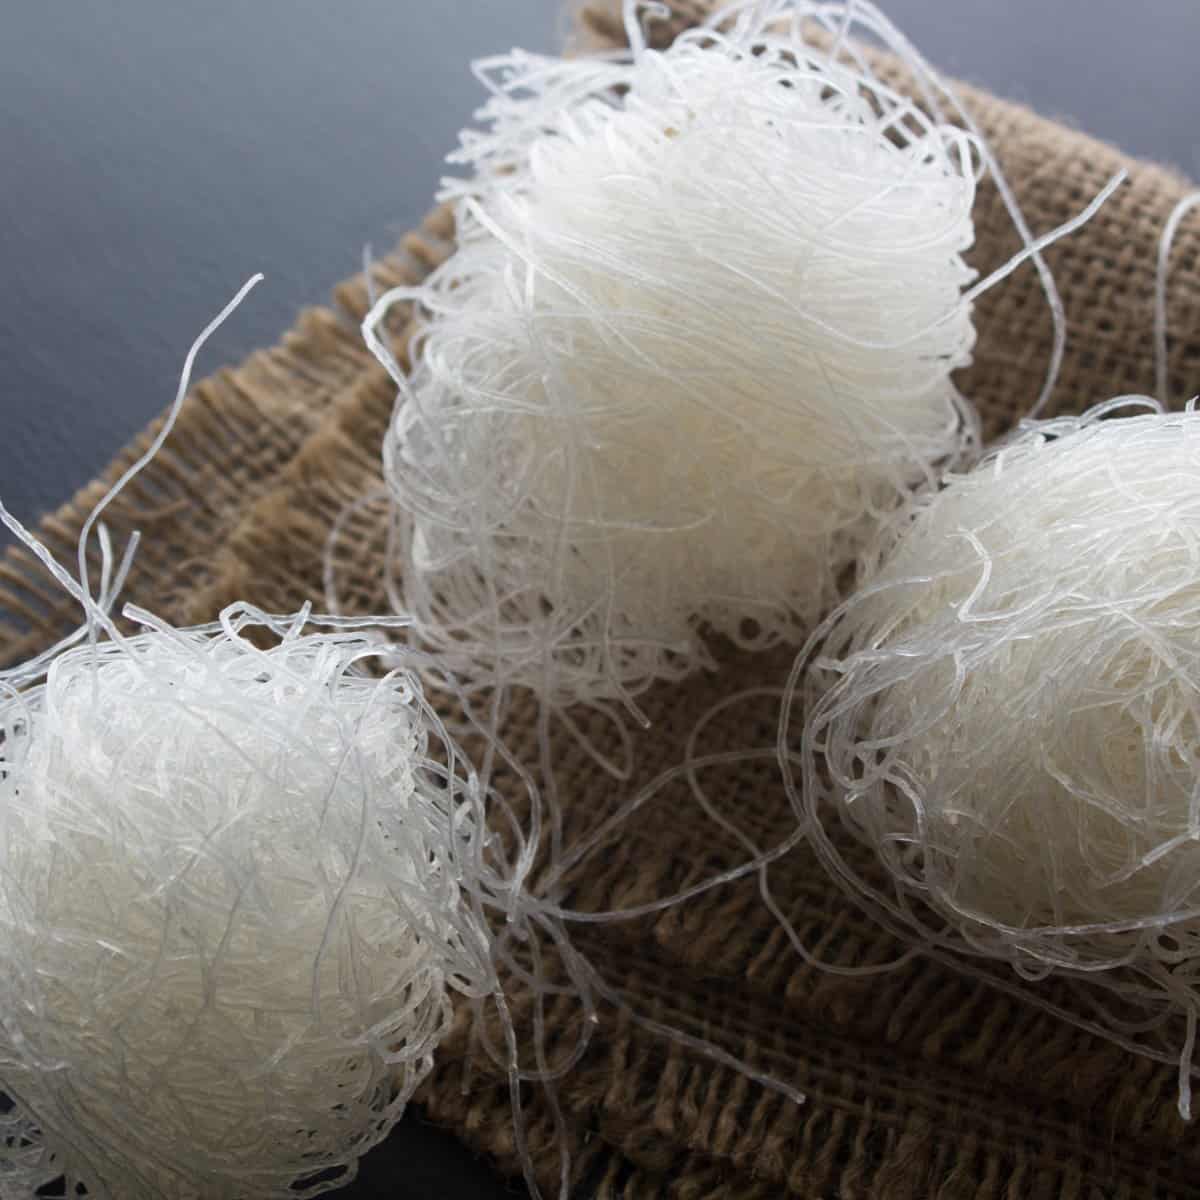 What is vermicelli